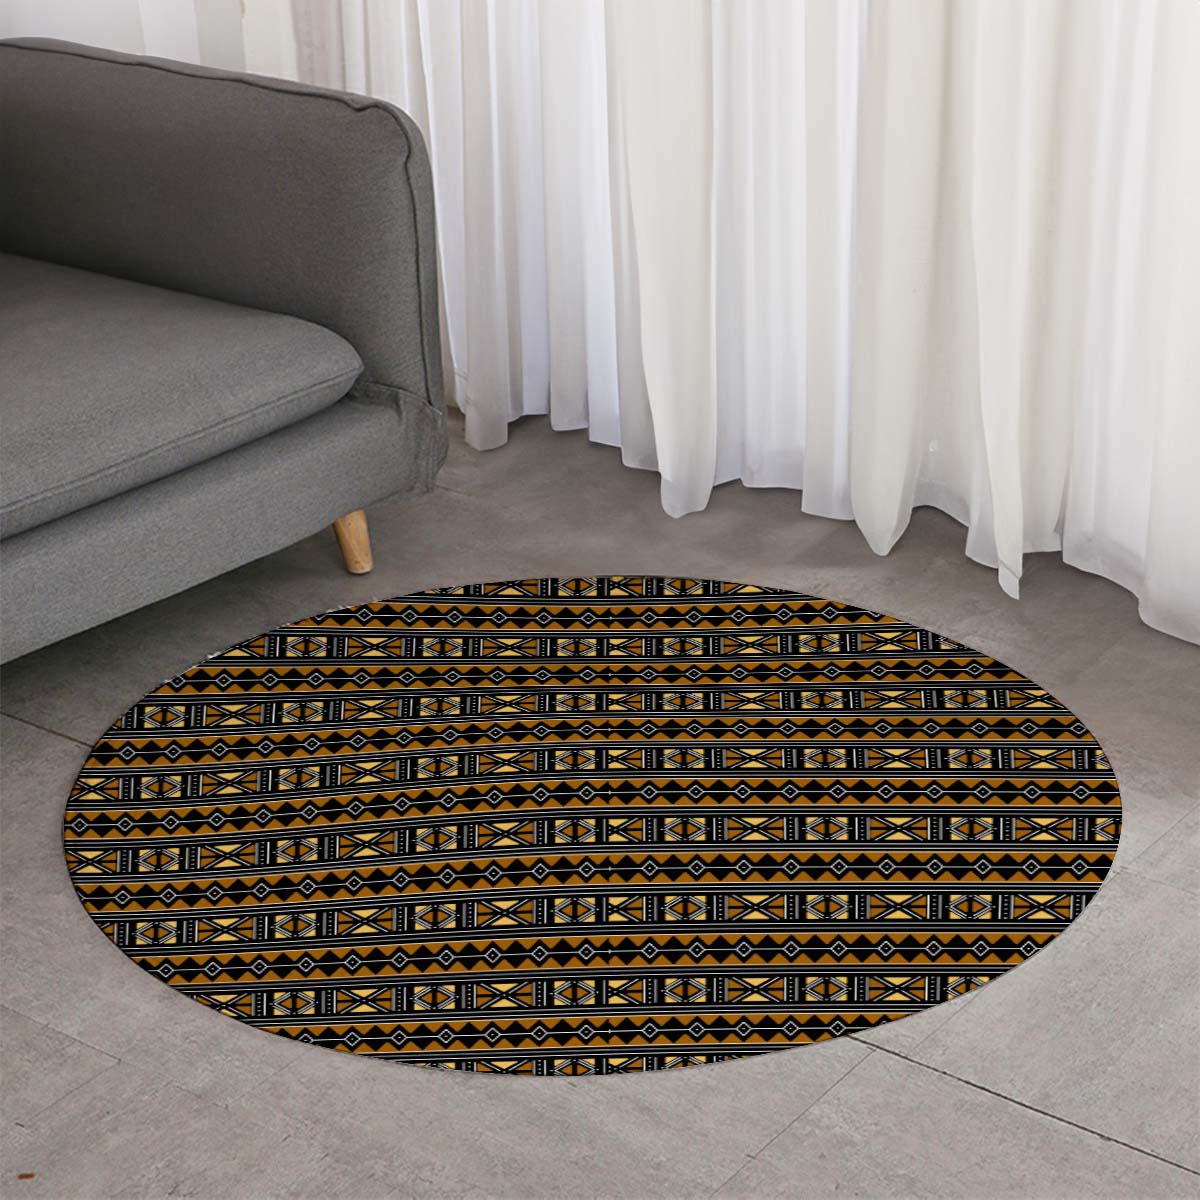 Mudcloth Round Rug African Tribal Carpet - Bynelo